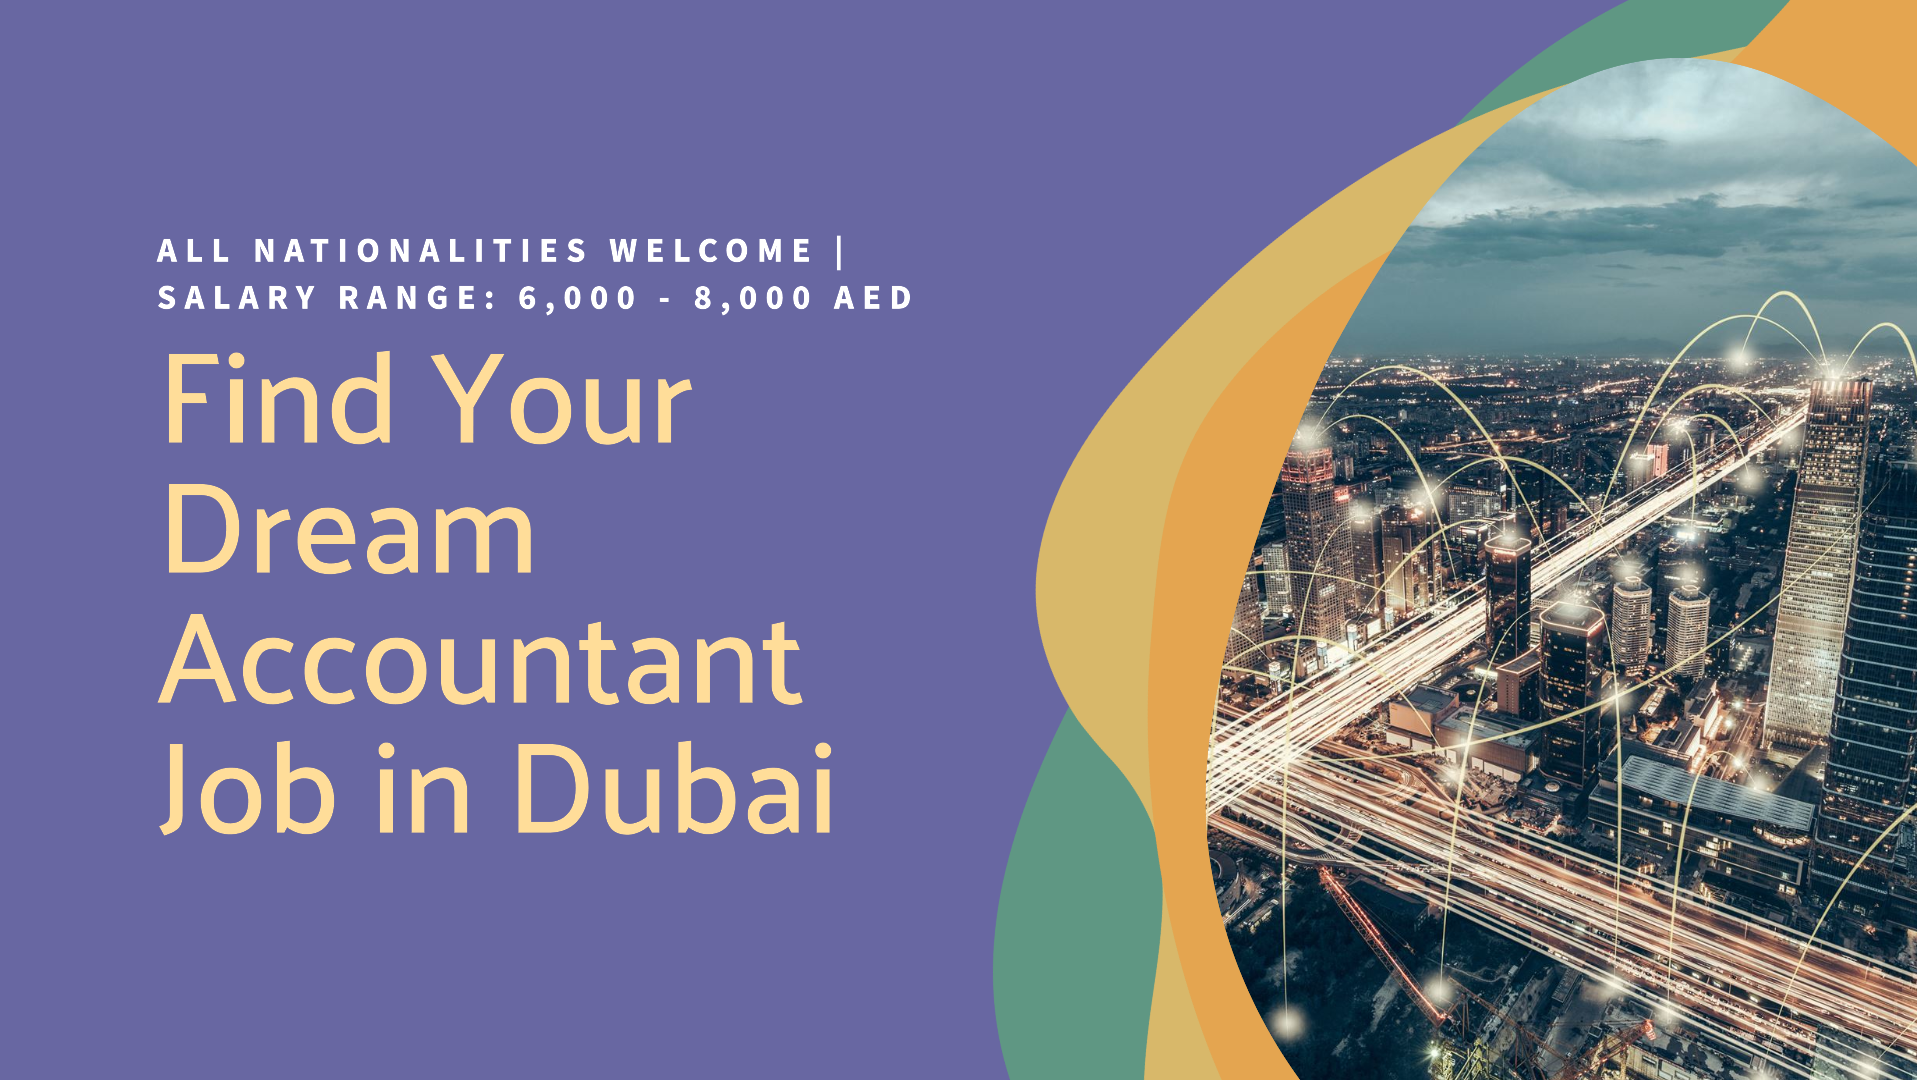 accountant jobs in dubai companies for all nationalities with salary 6,000 – 8,000 AED